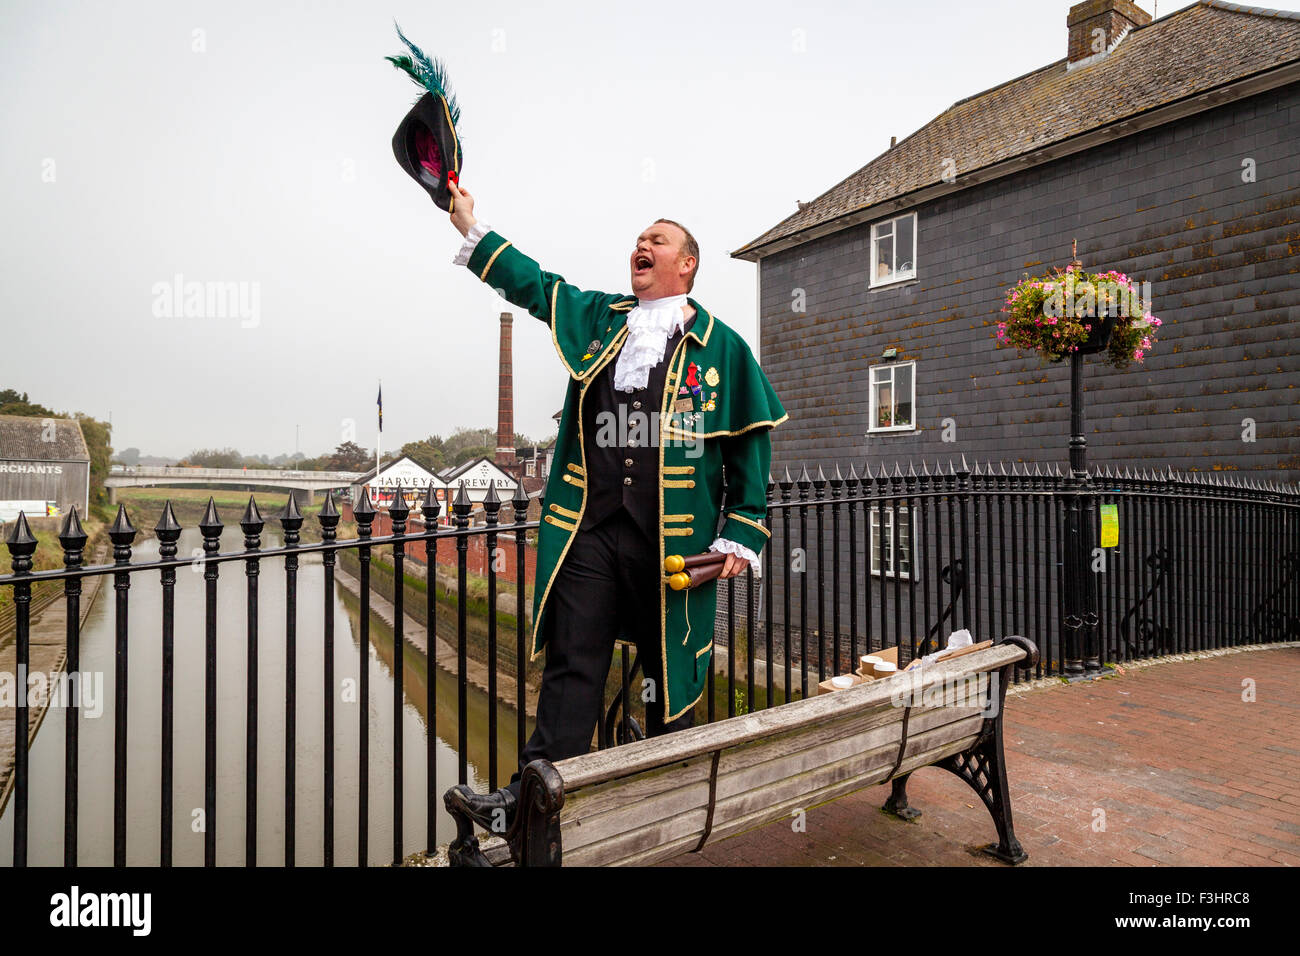 Town Crier, High Street, Lewes, Sussex, UK Stock Photo